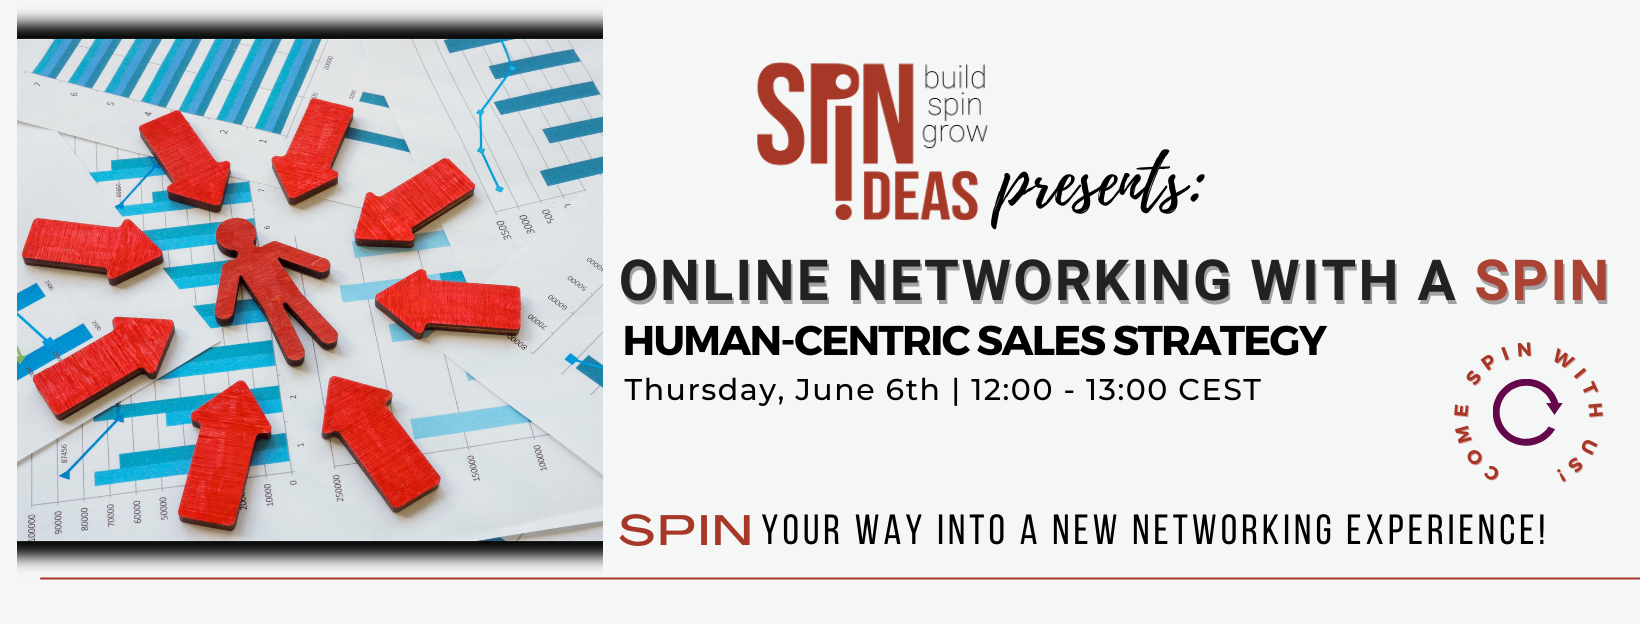 Online Networking with a SPIN: Human-Centric Sales Strategy